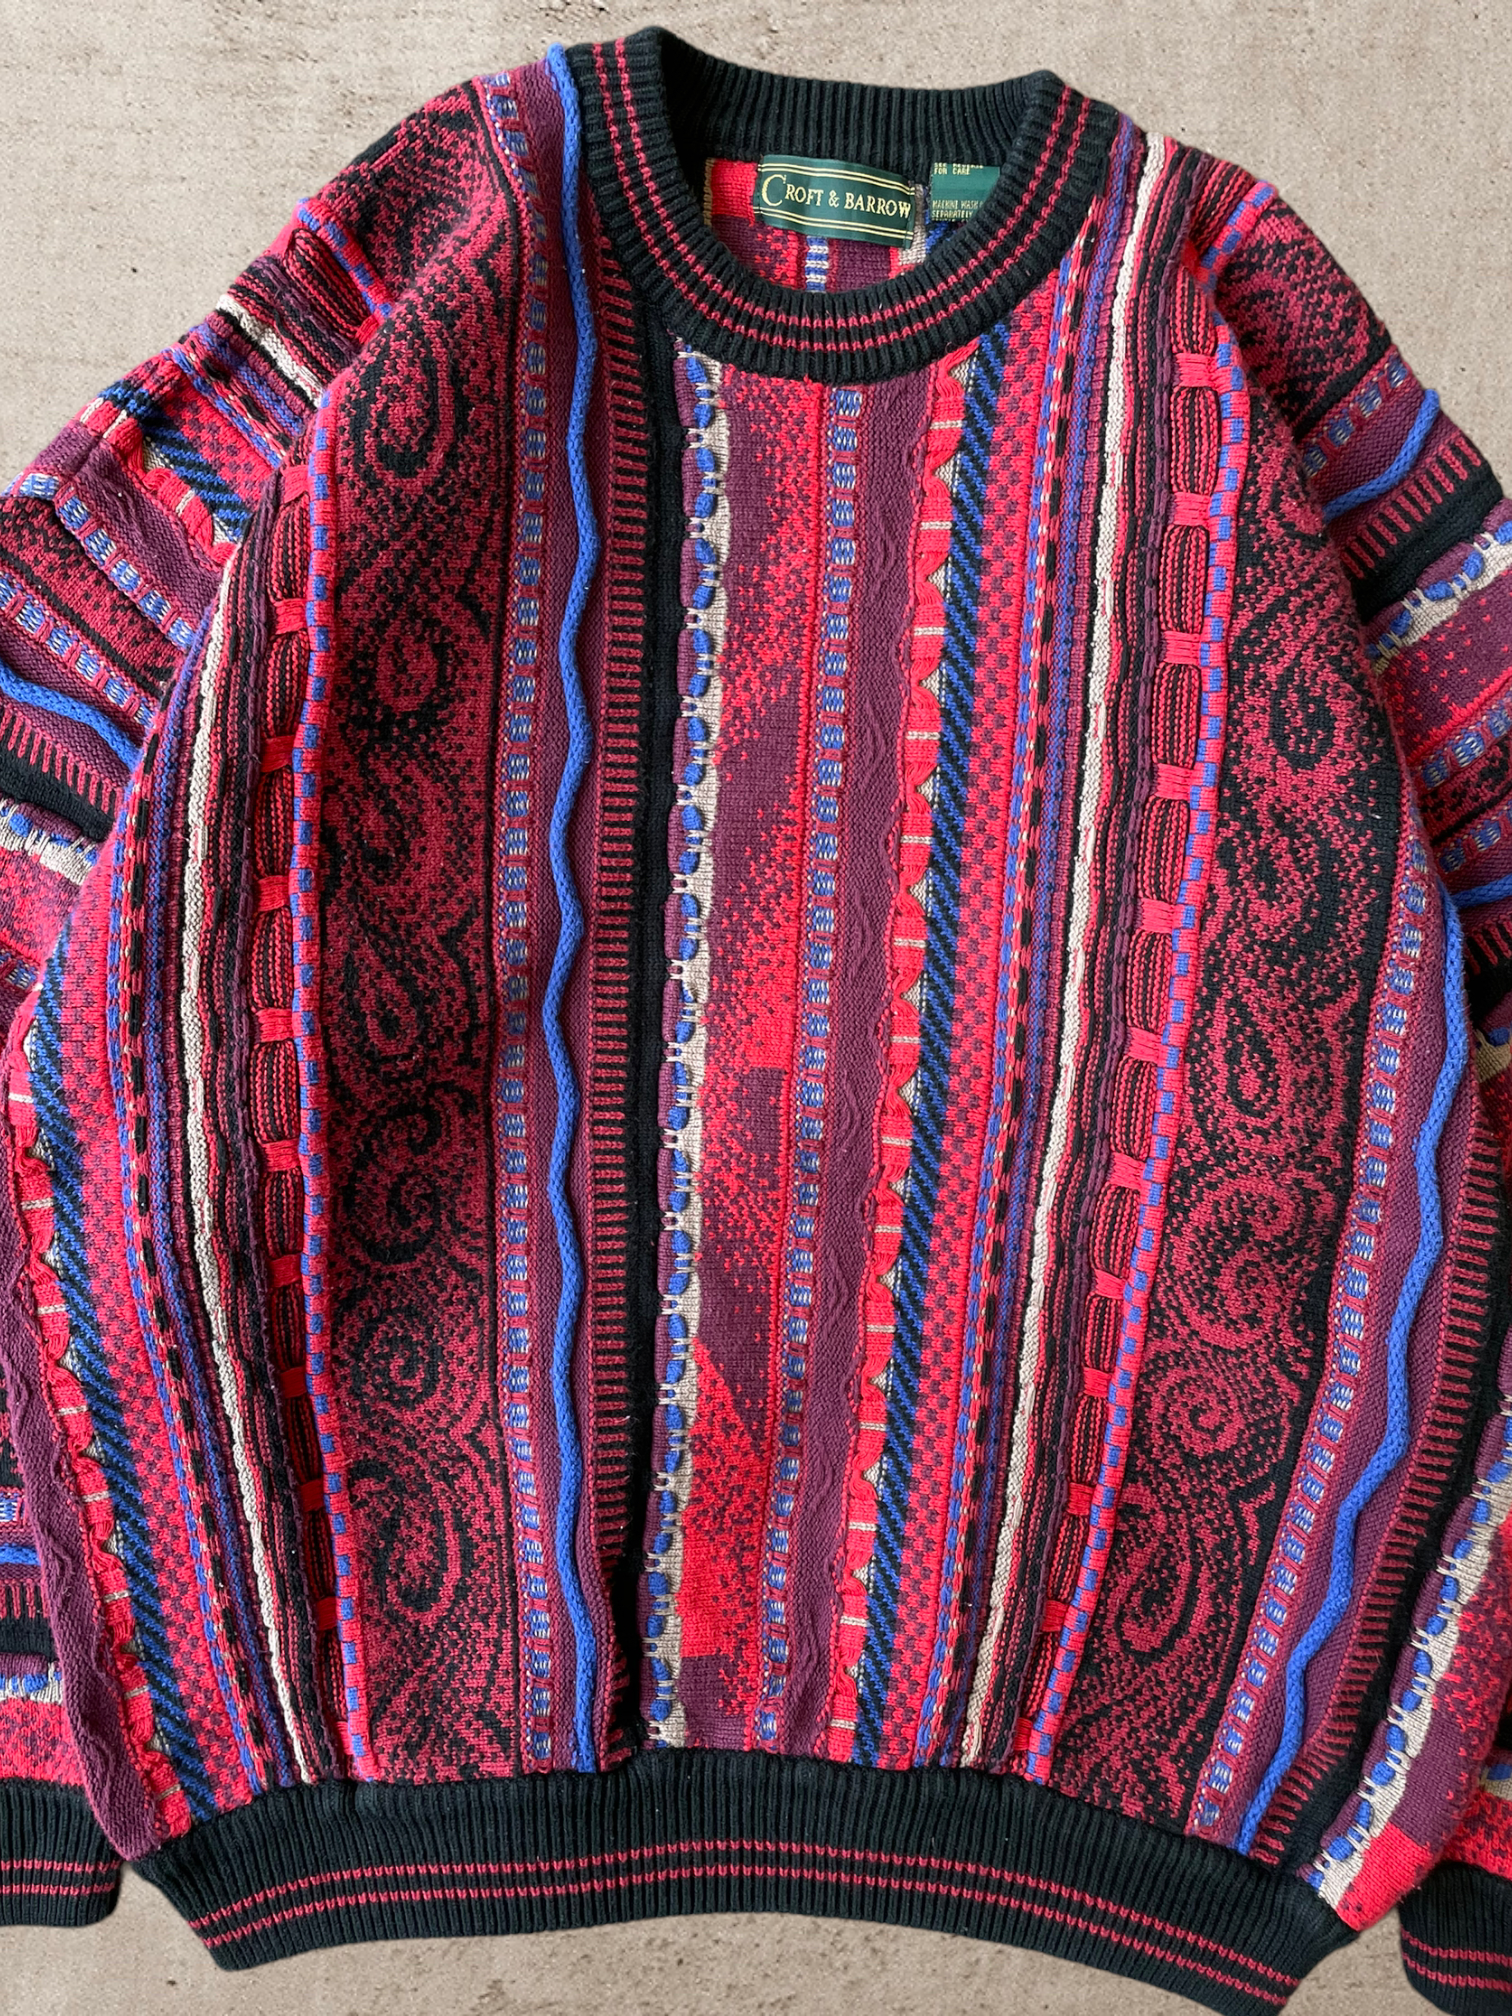 90s Multicolor Knit Sweater - X-Large